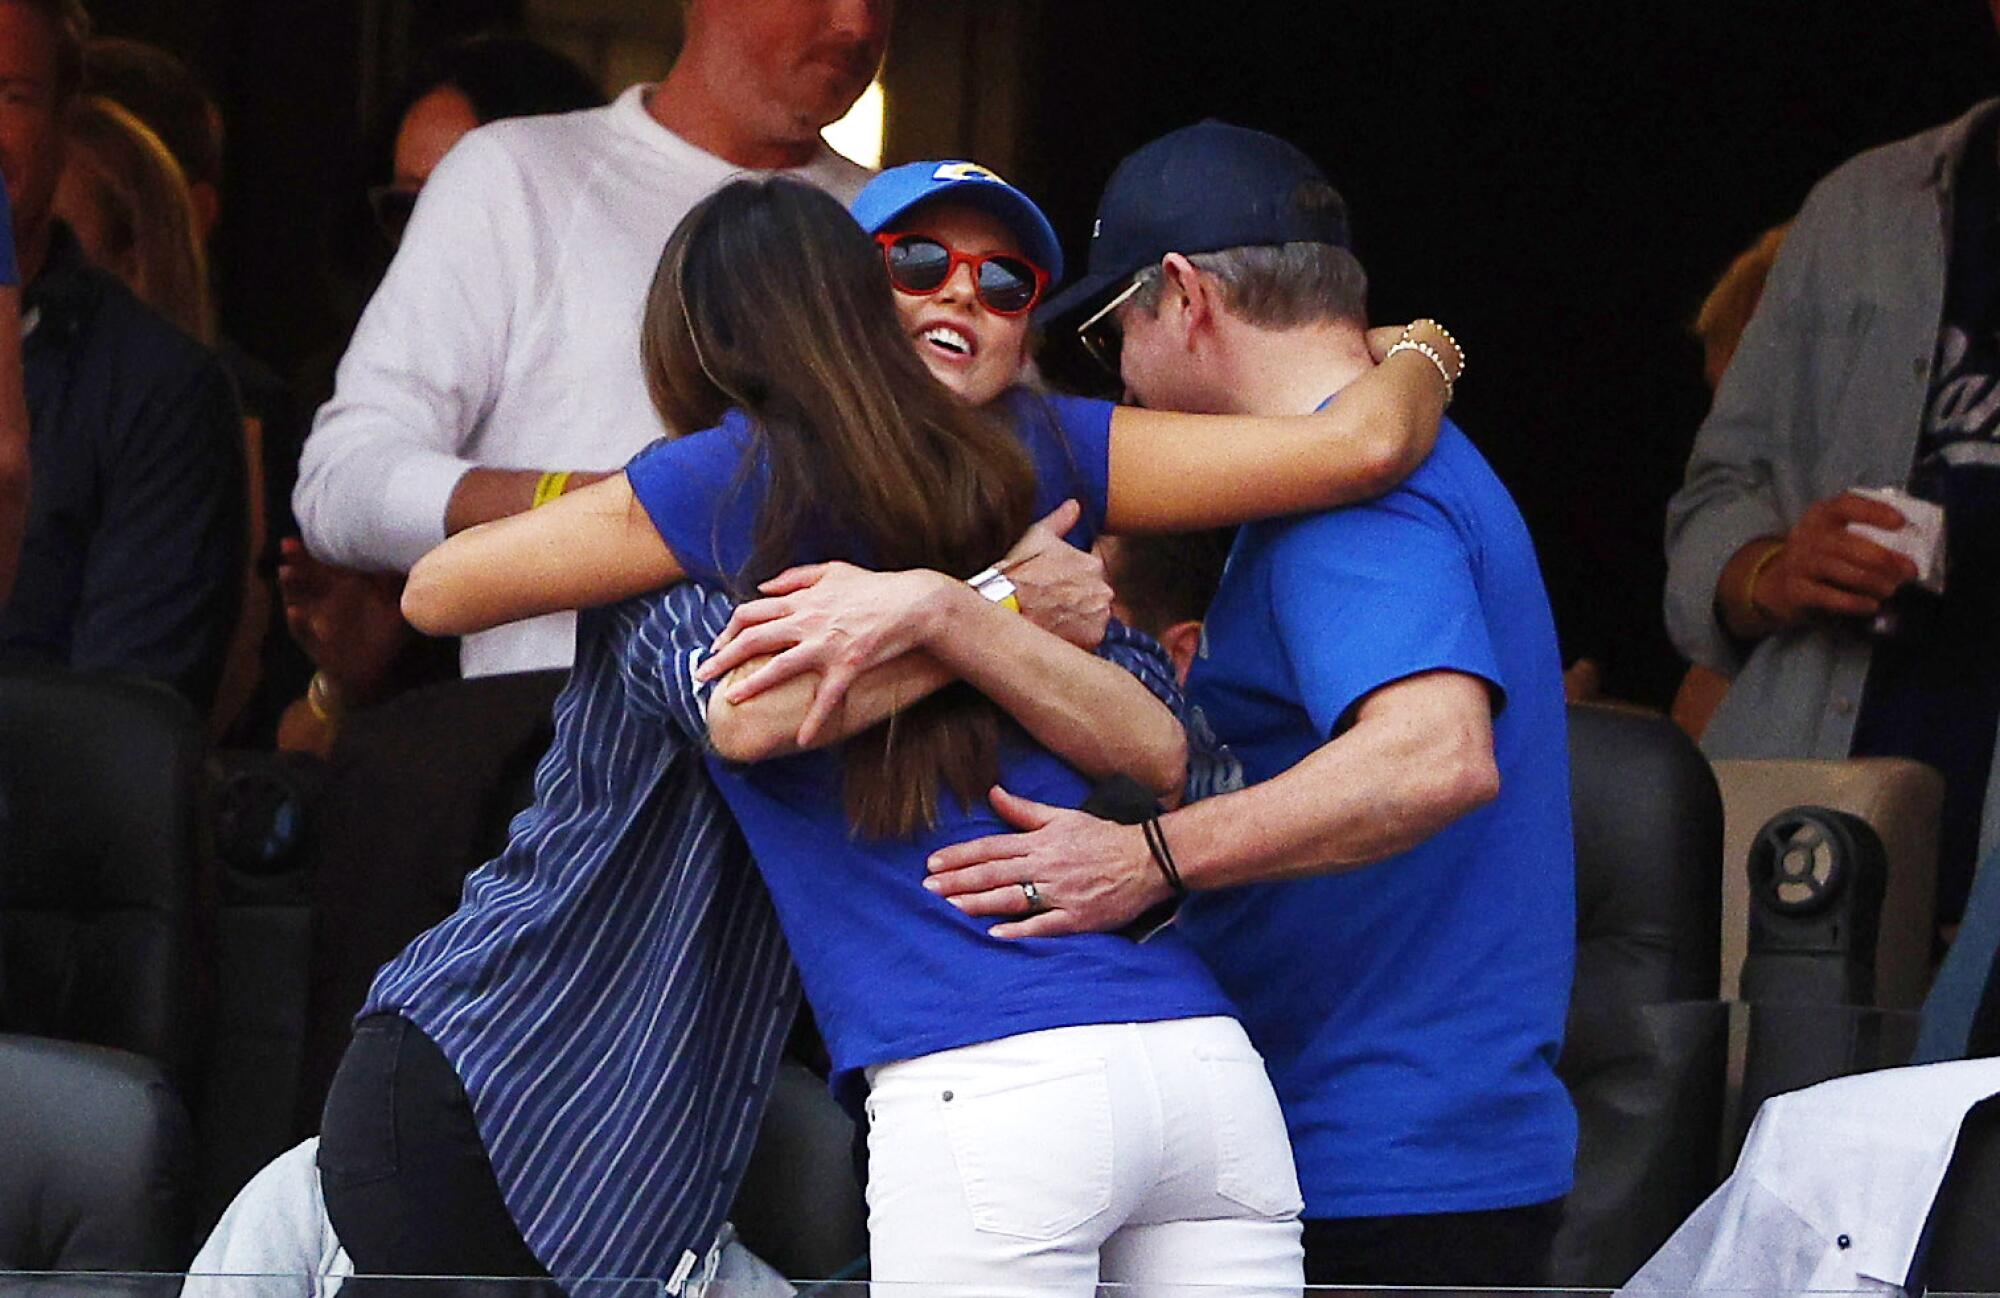 Two women and a man have a group hug.